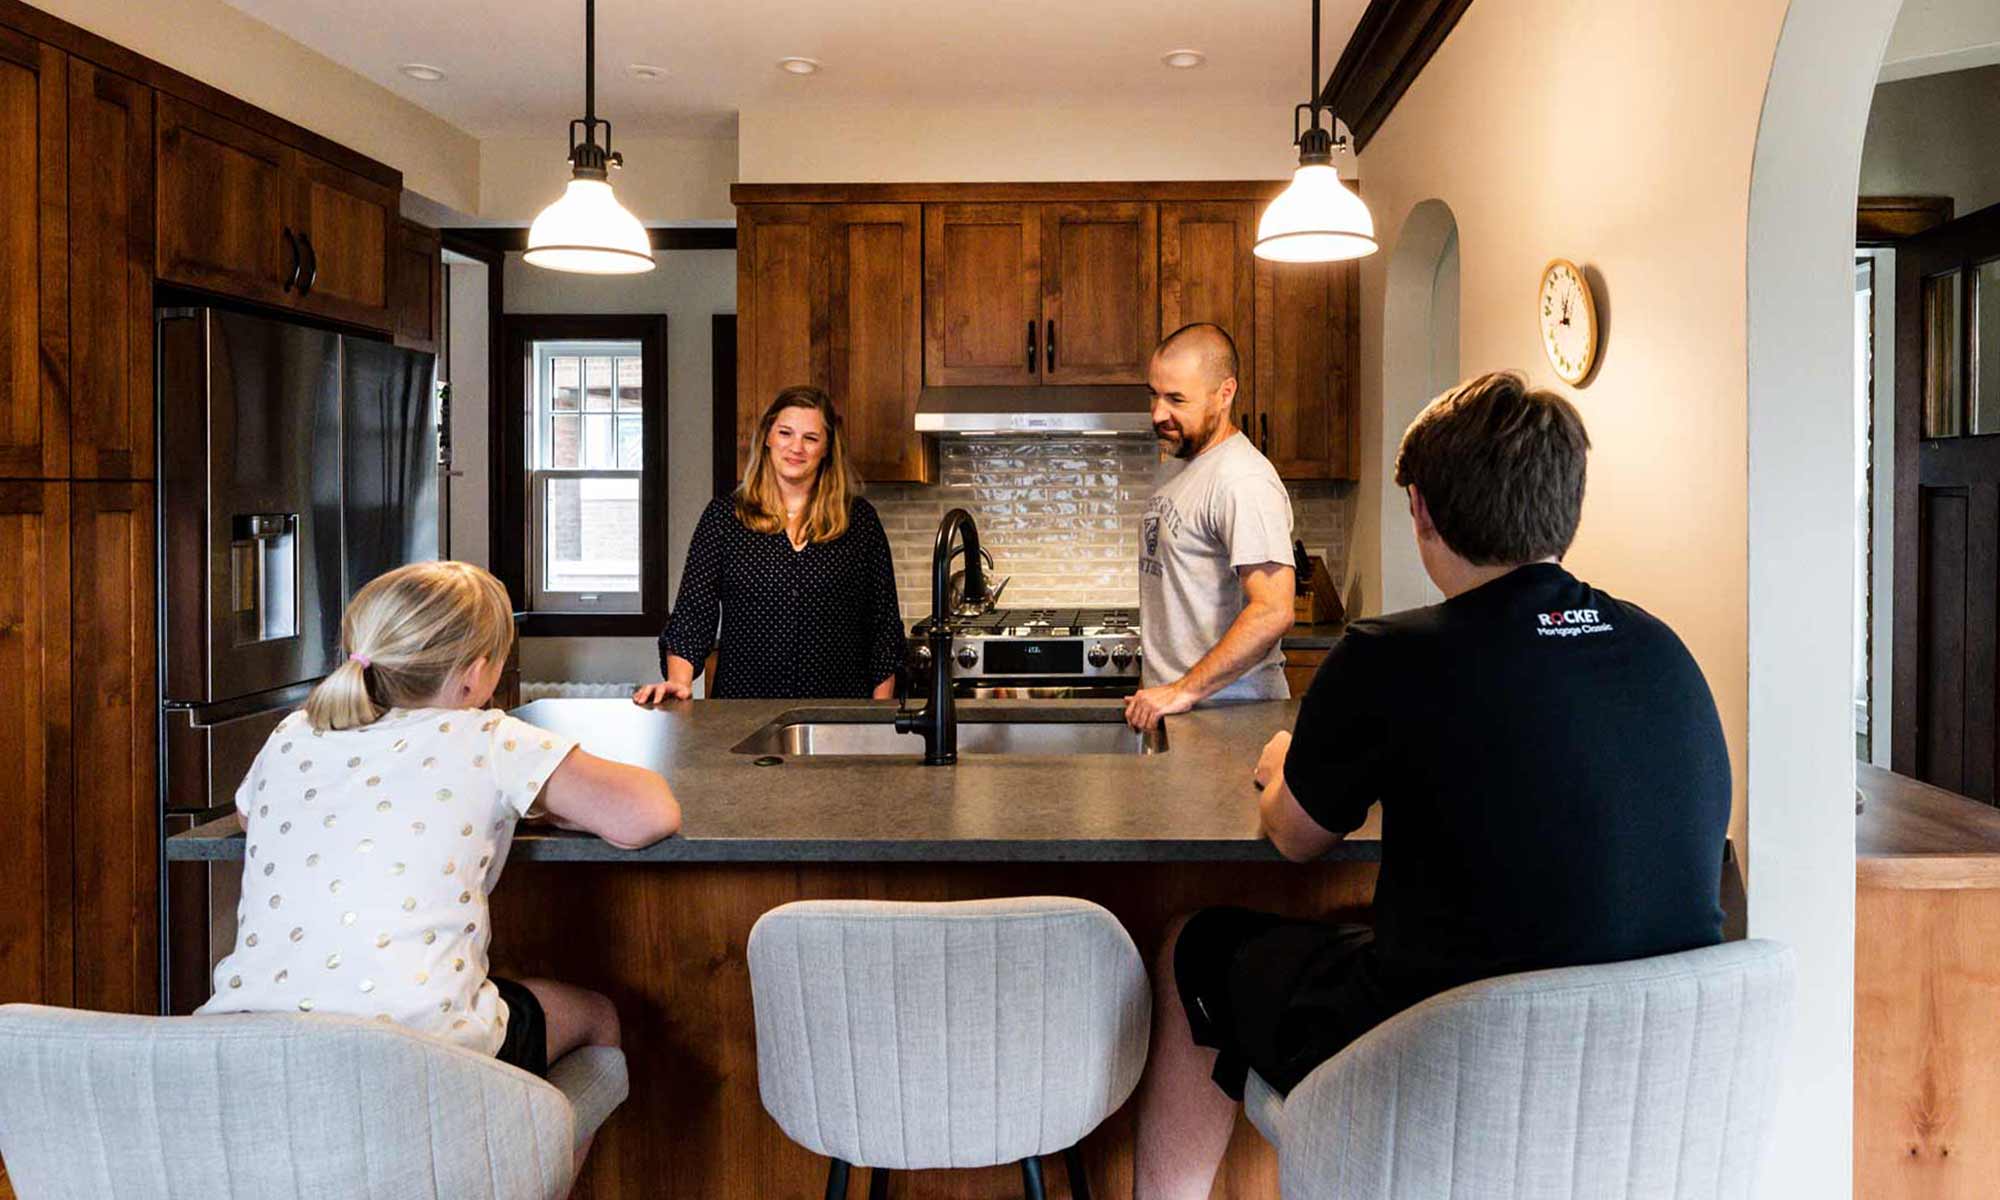 Family gathered in newly remodeled kitchen with dark wood cabinets